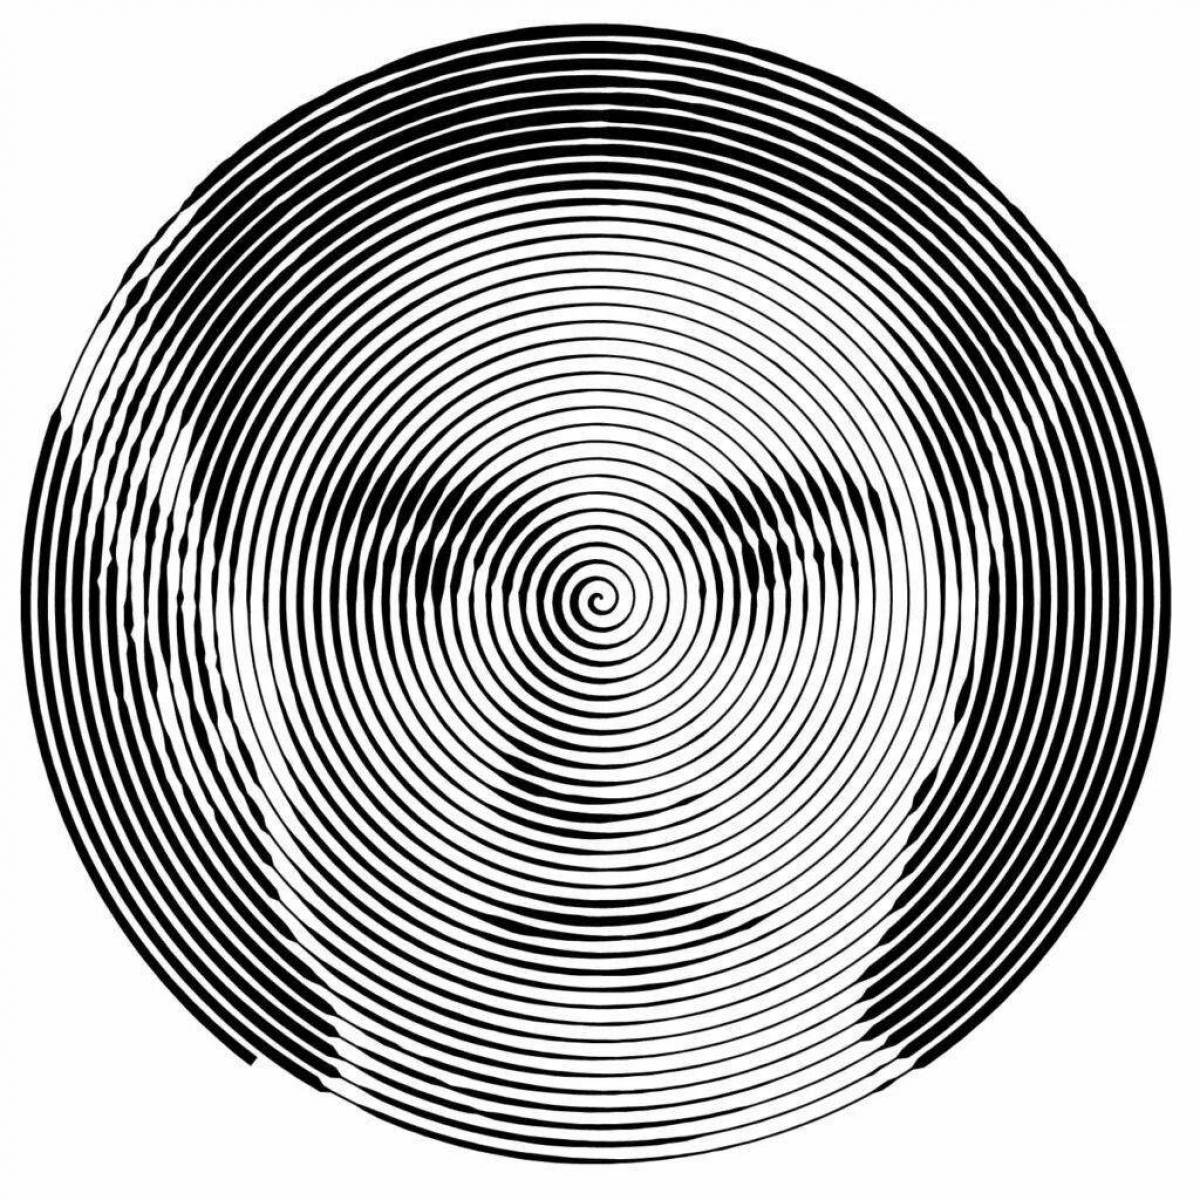 Circular spiral coloring page welcome